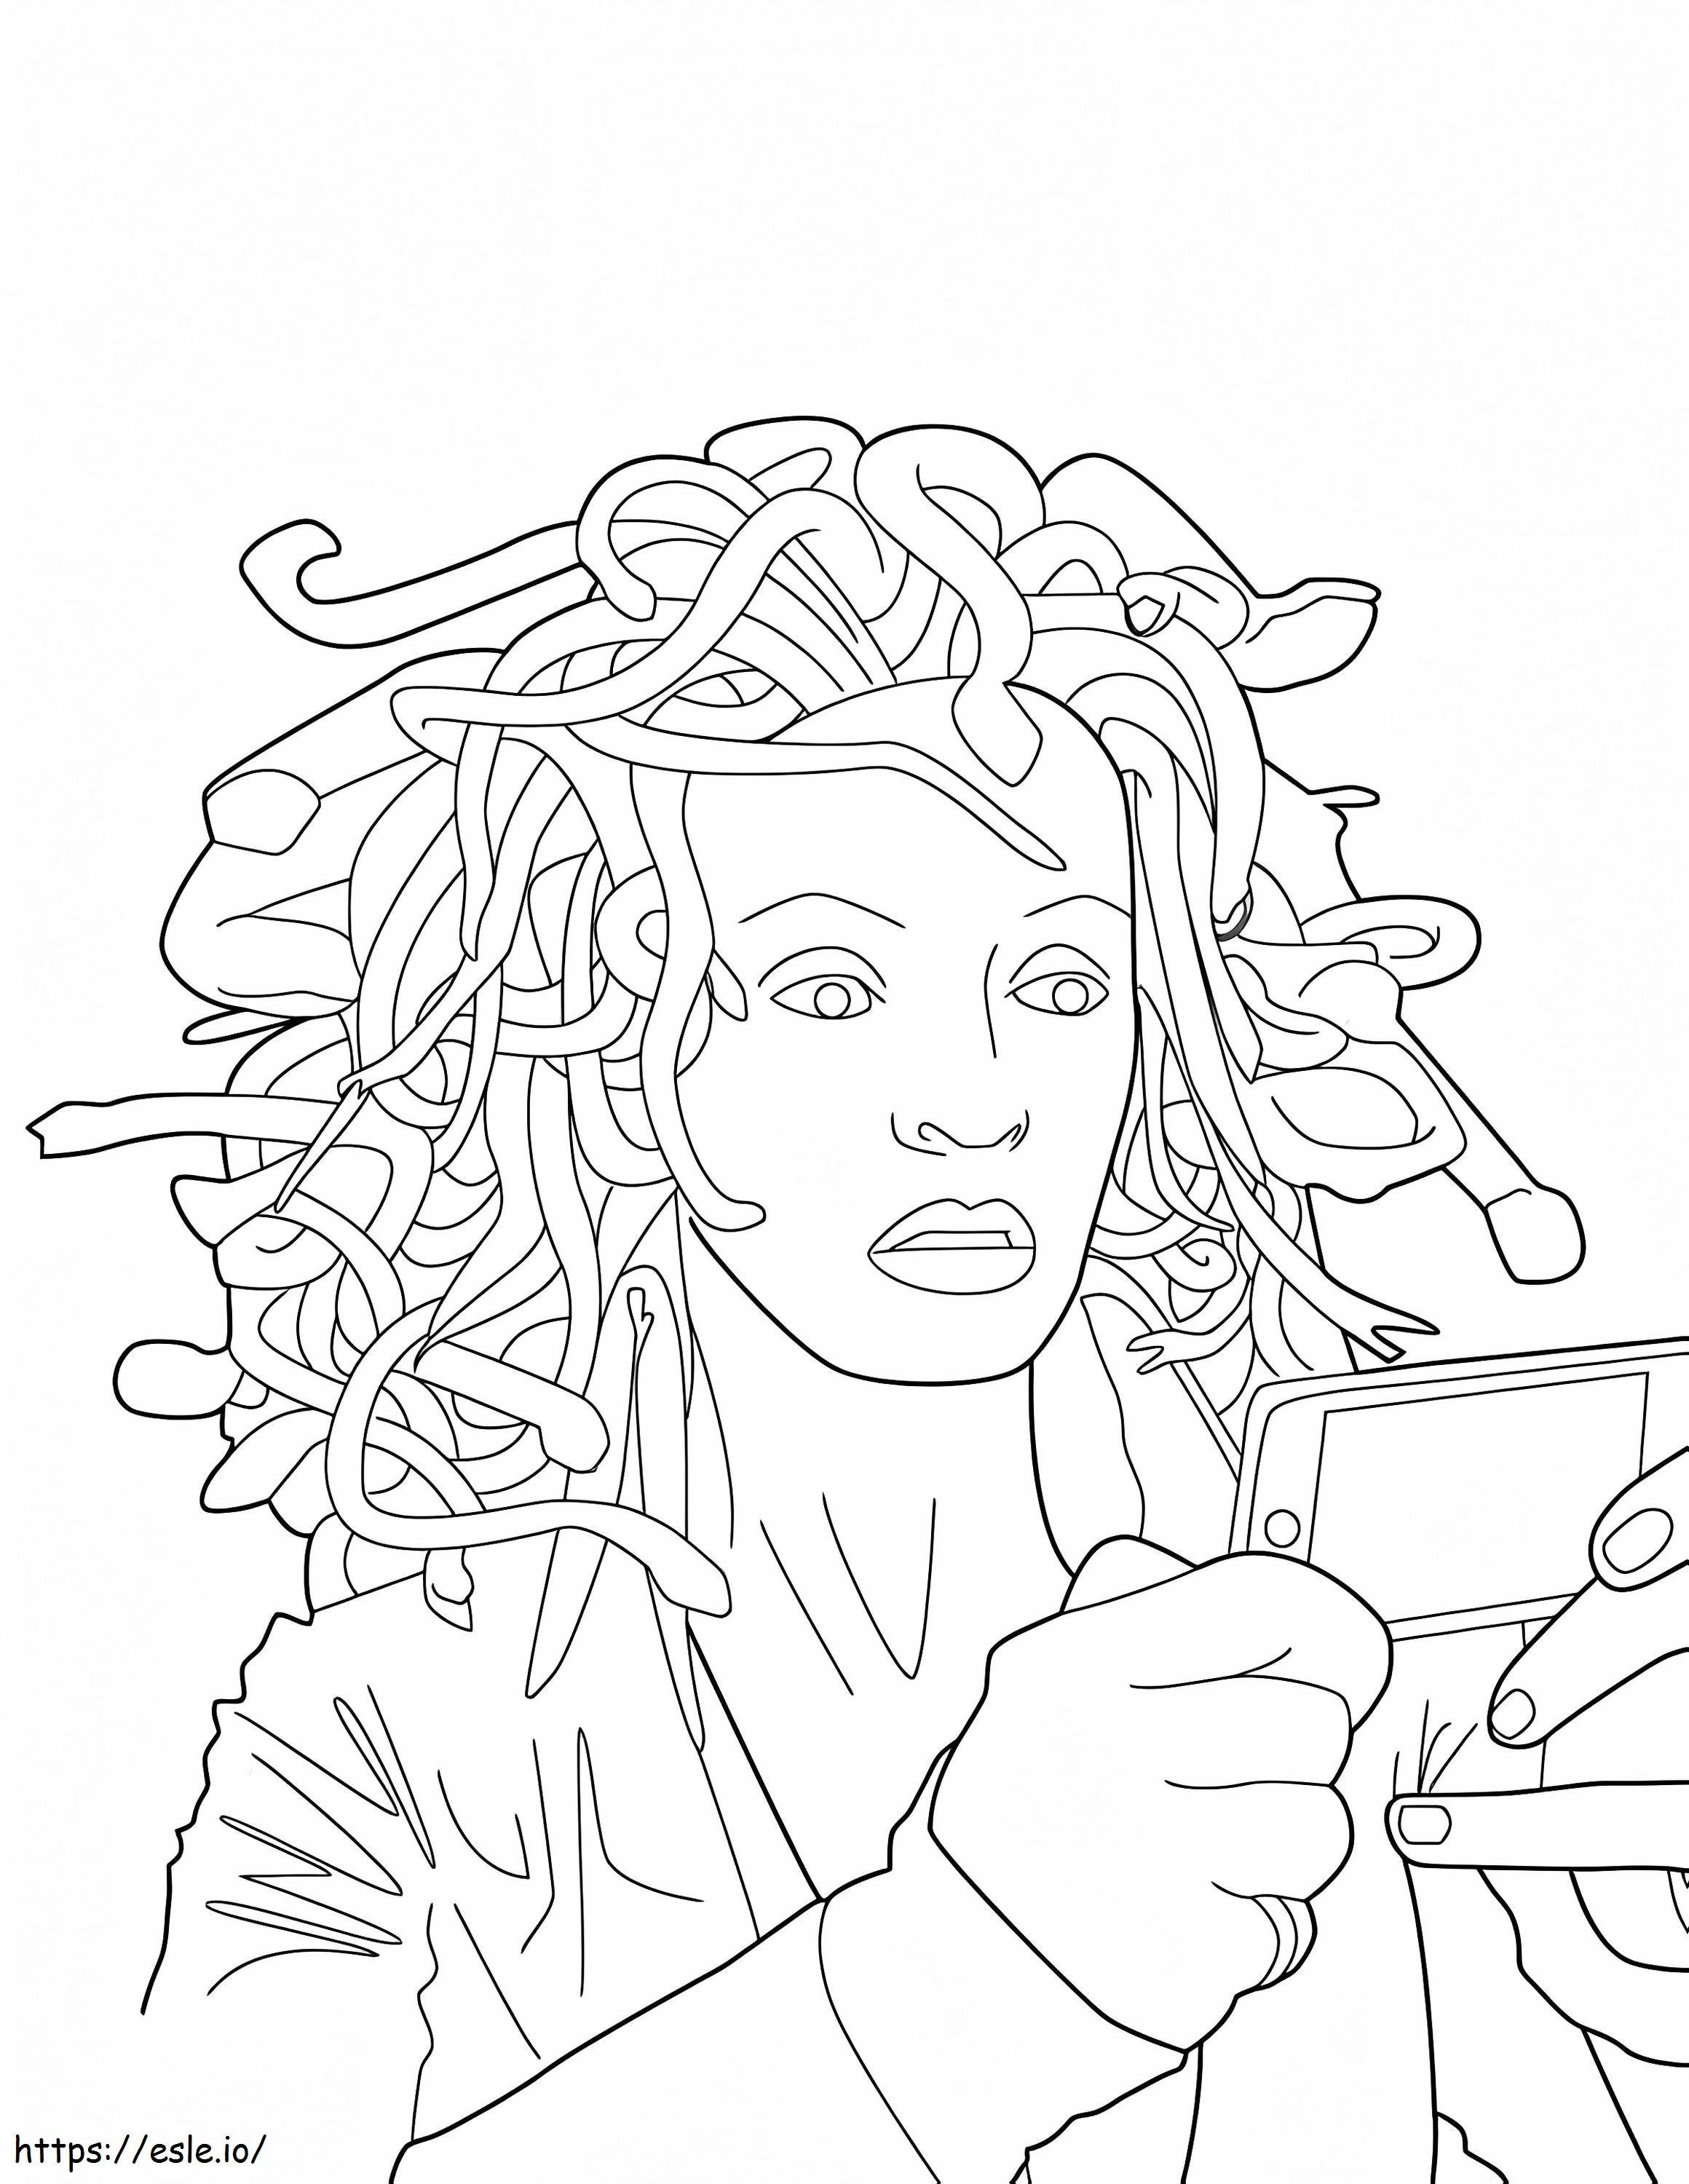 Medusa With Cell Phone coloring page